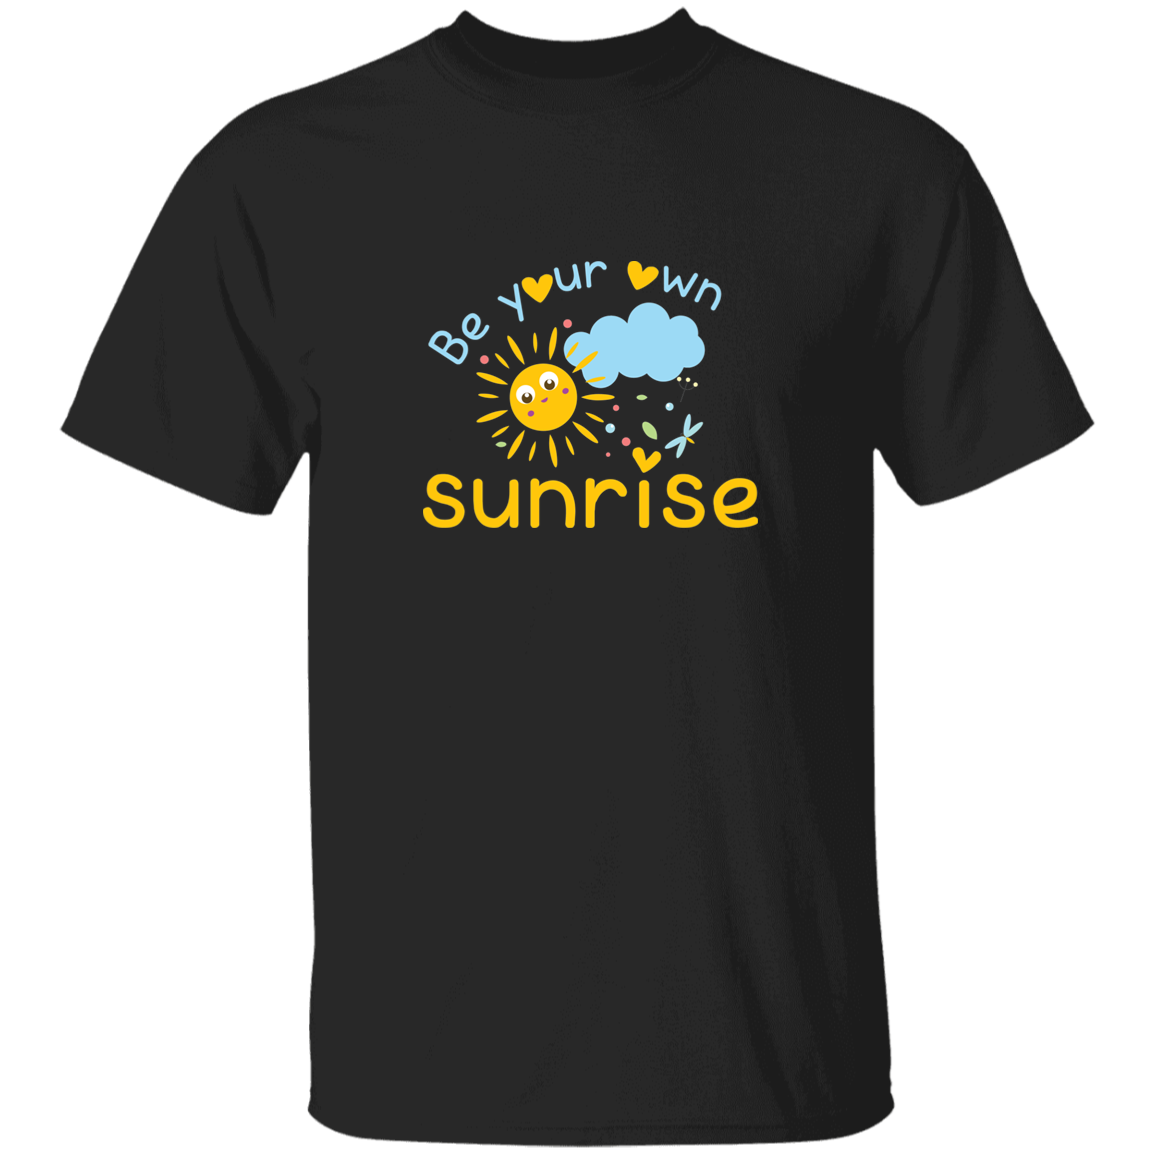 Be Your Own Sunrise - G500B Youth 5.3 oz 100% Cotton T-Shirt